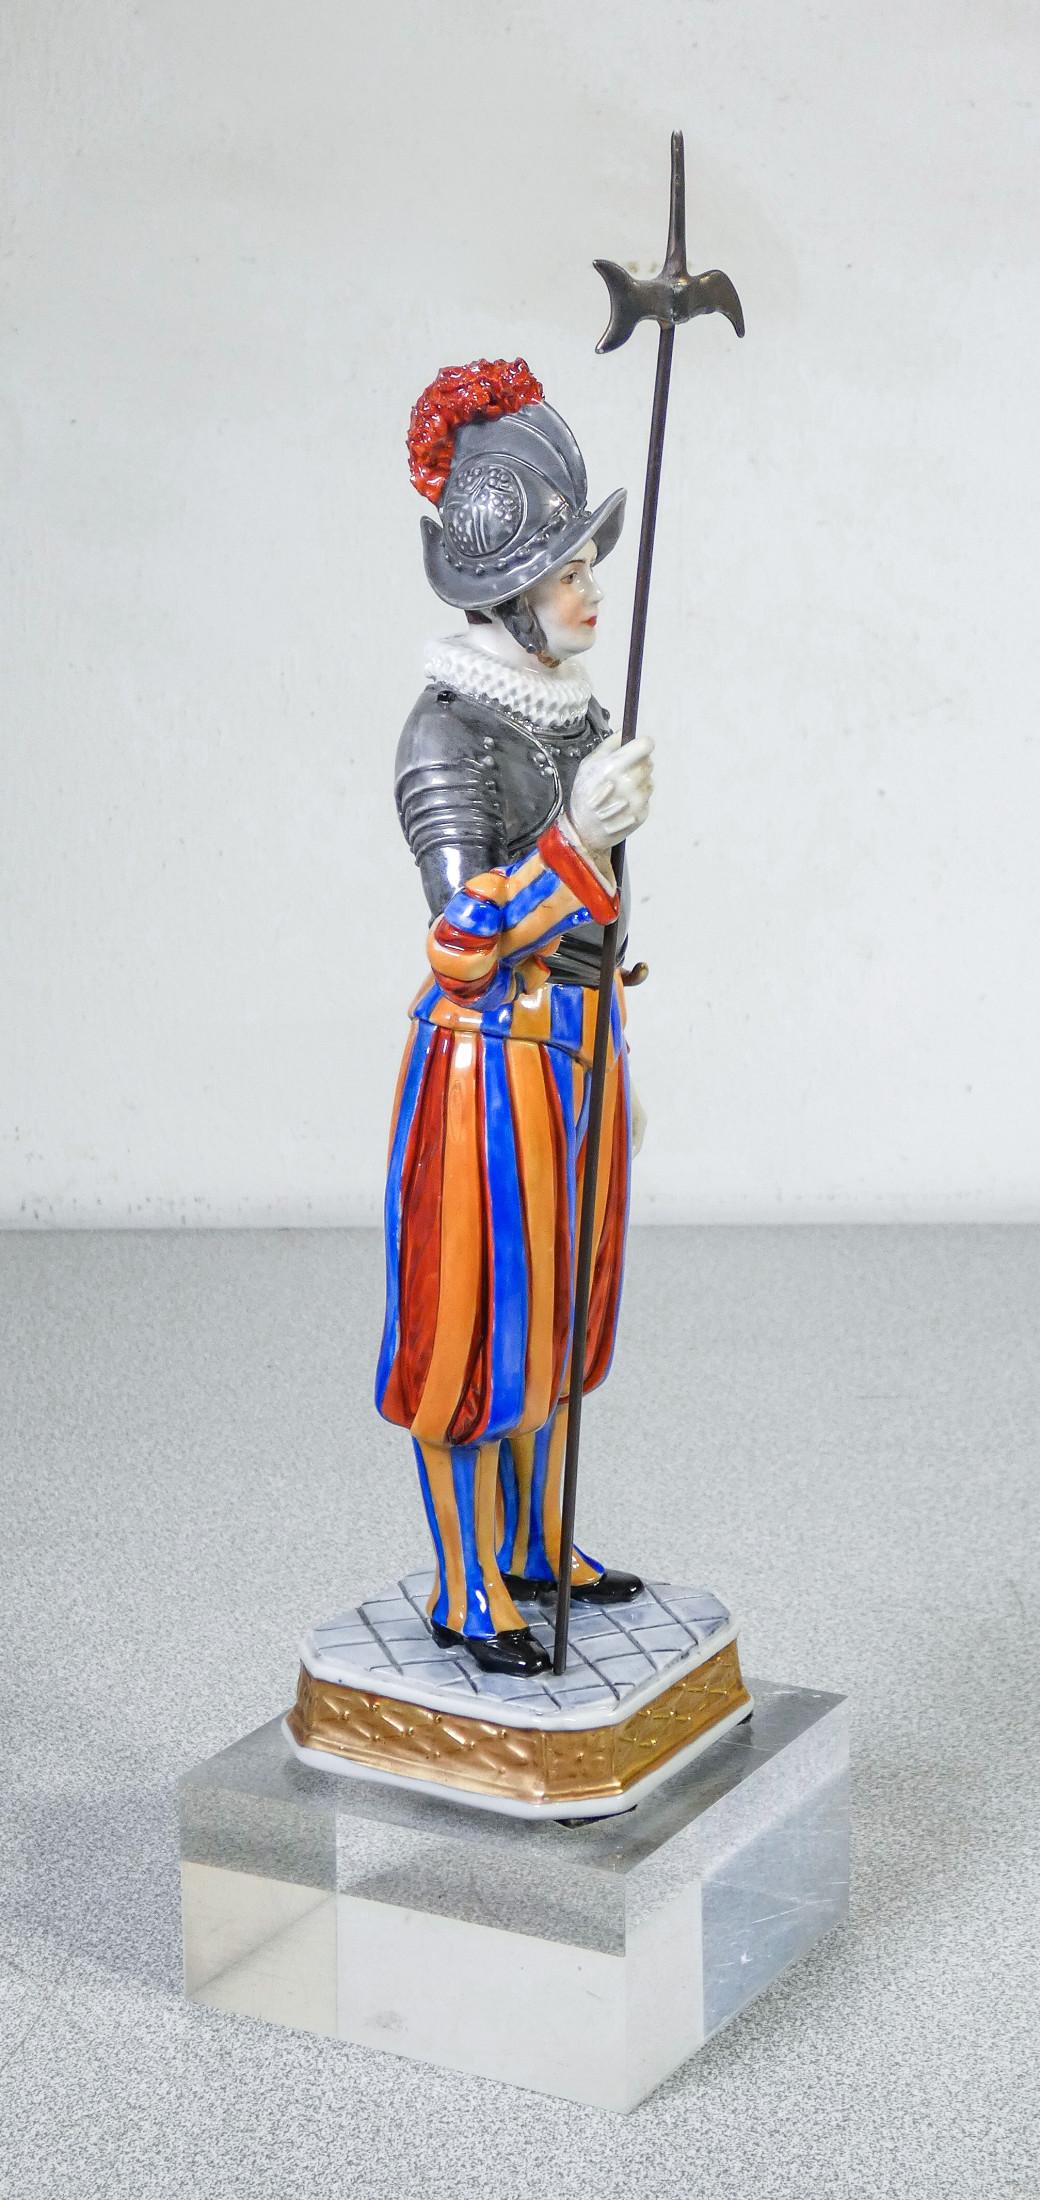 20th Century Porcelain Figurine Aelteste Volkstedt, Pontifical Swiss Guard, Early 20th C